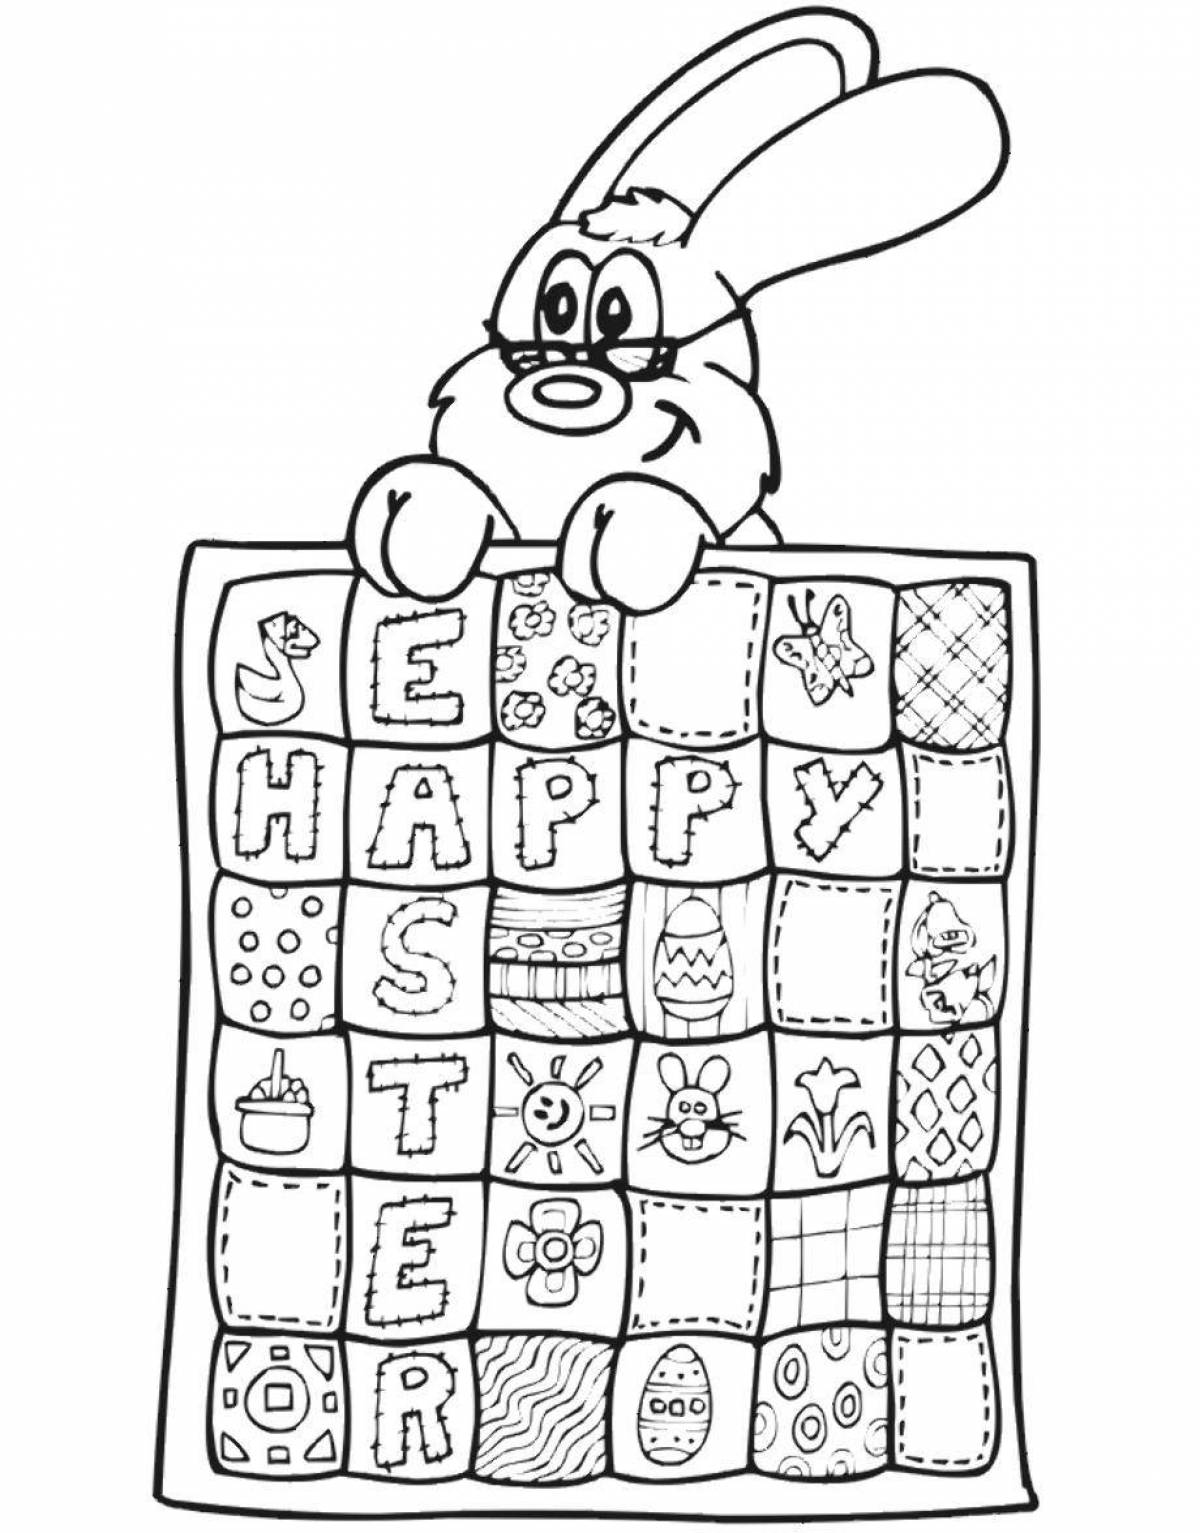 Luminous blanket coloring page